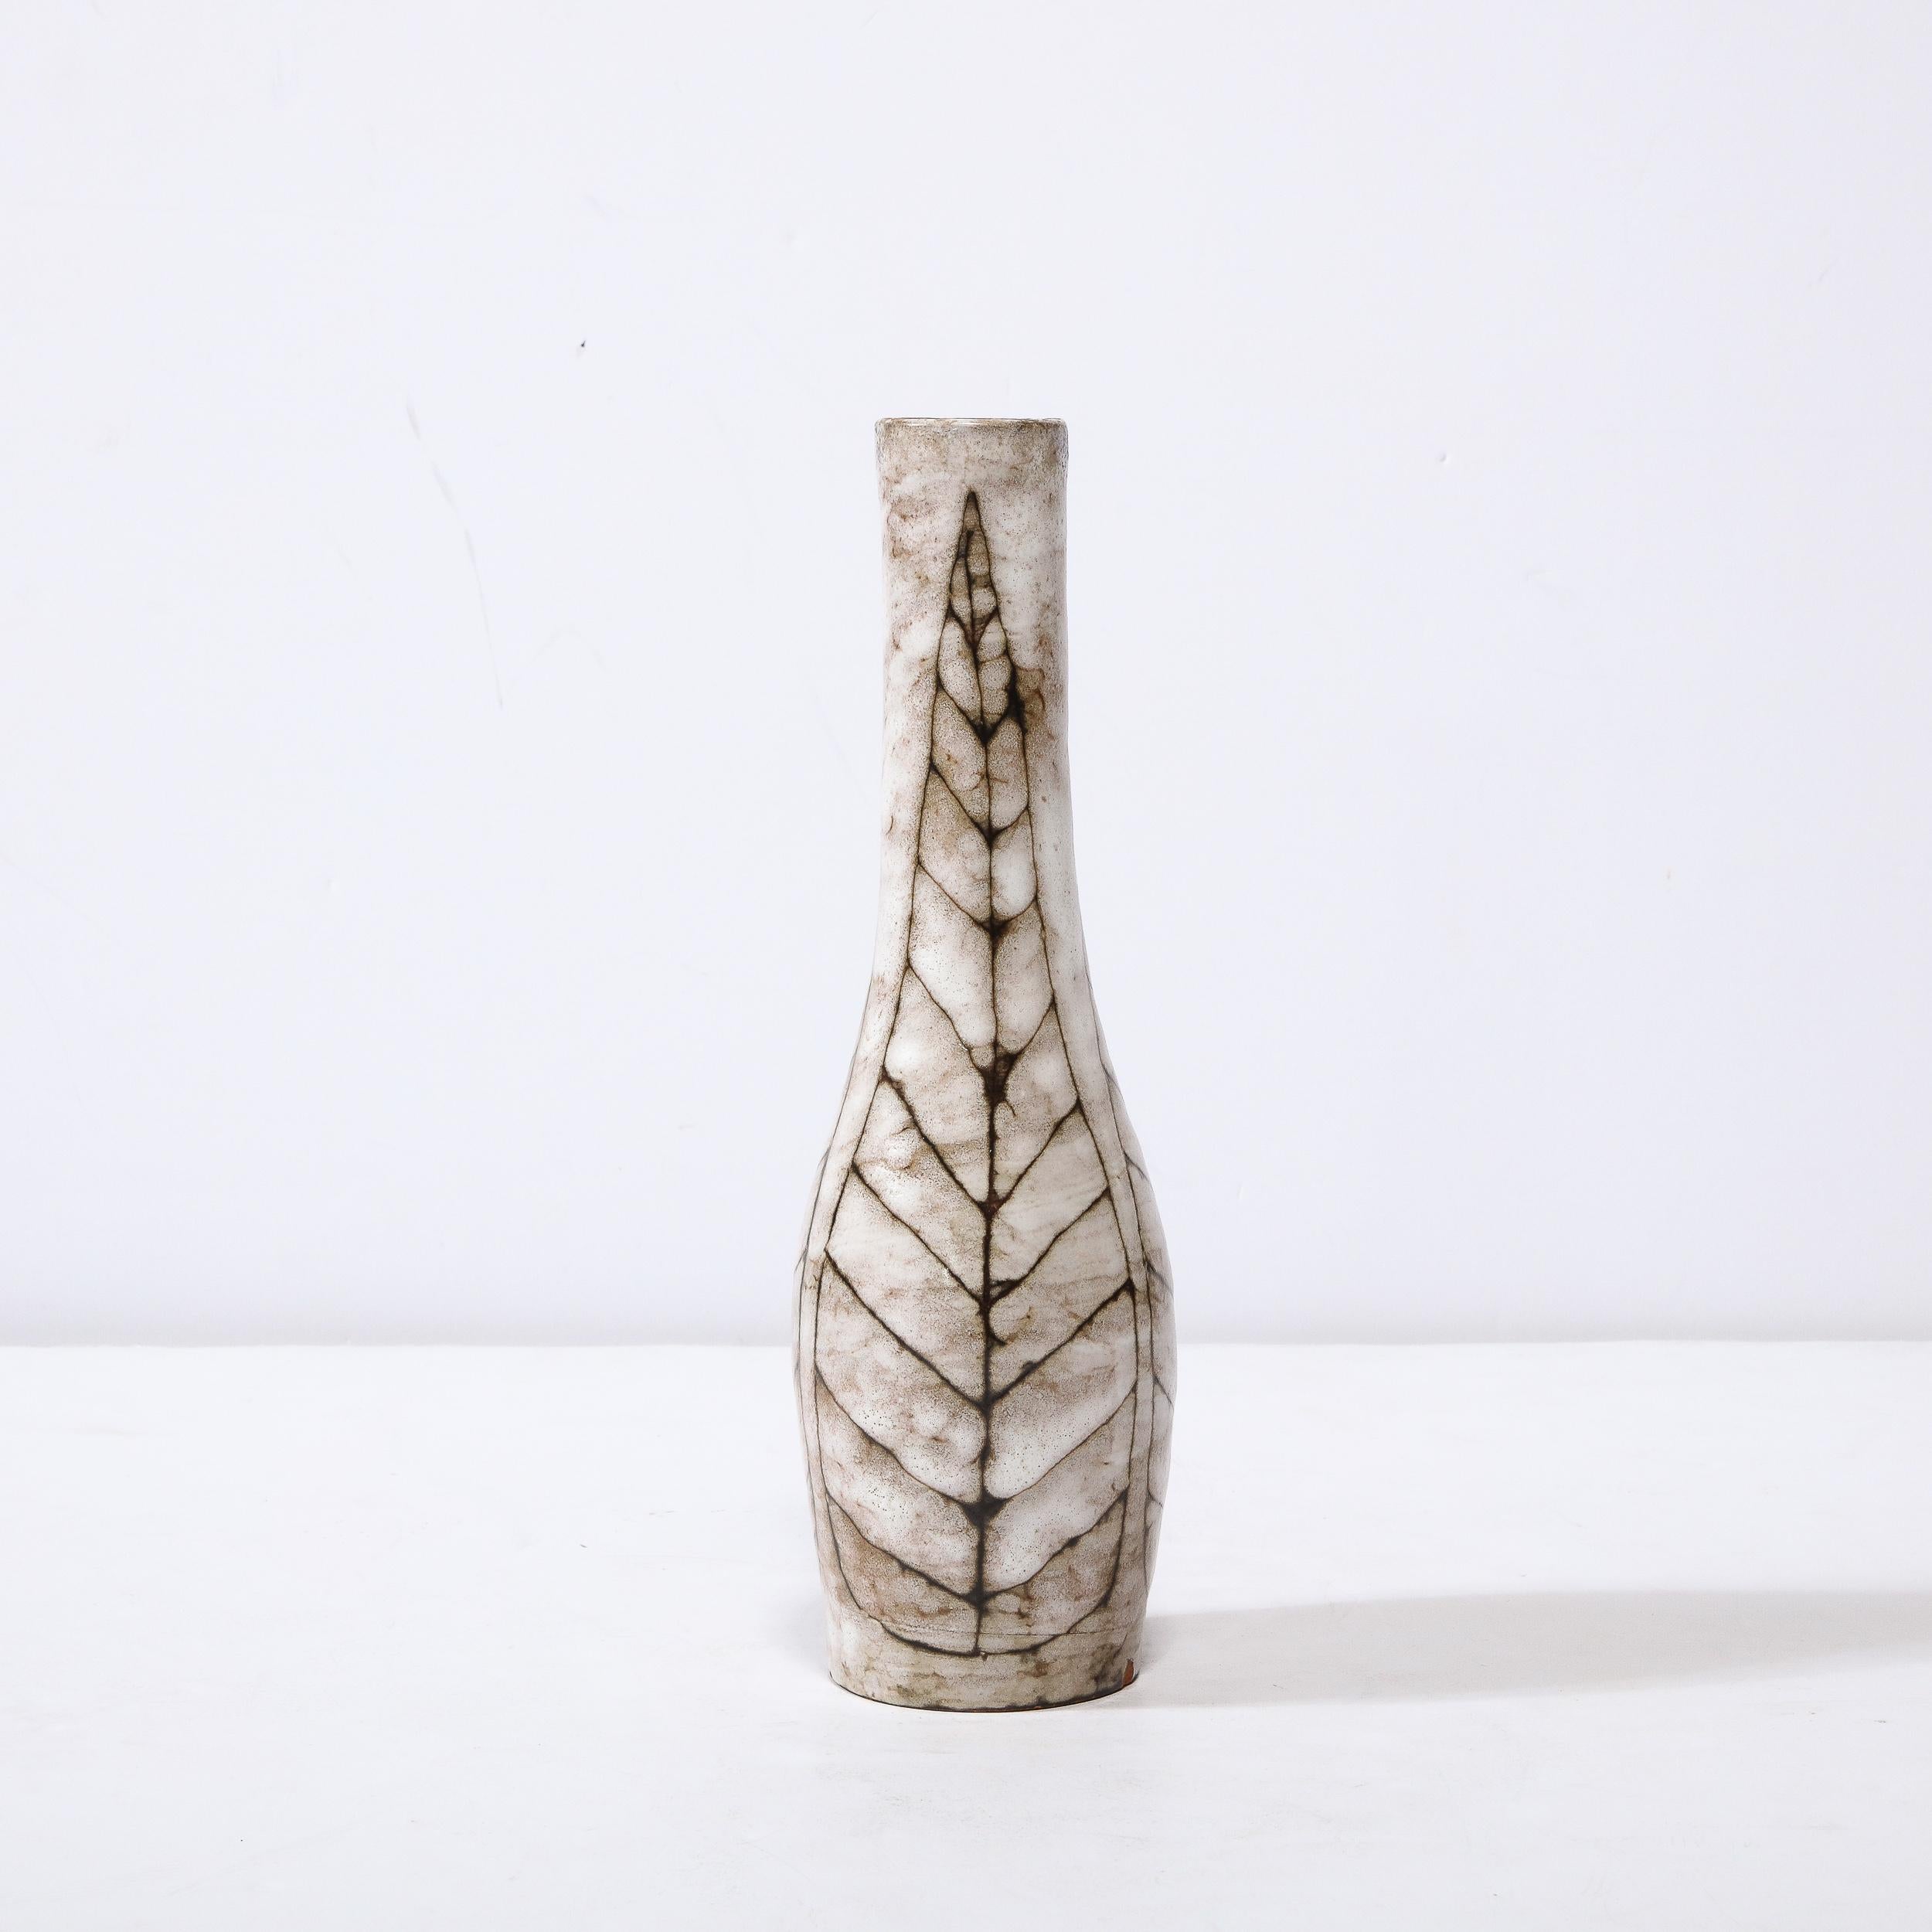 This Mid-Century Modernist Tapered Ceramic Vase with Linear Leaf Motif is a beautiful example of Post War European Ceramics, realized in Hódmezovasarhely Majolikagyár, Hungary circa 1960. With a Stunning textural finish composed in Cream White and